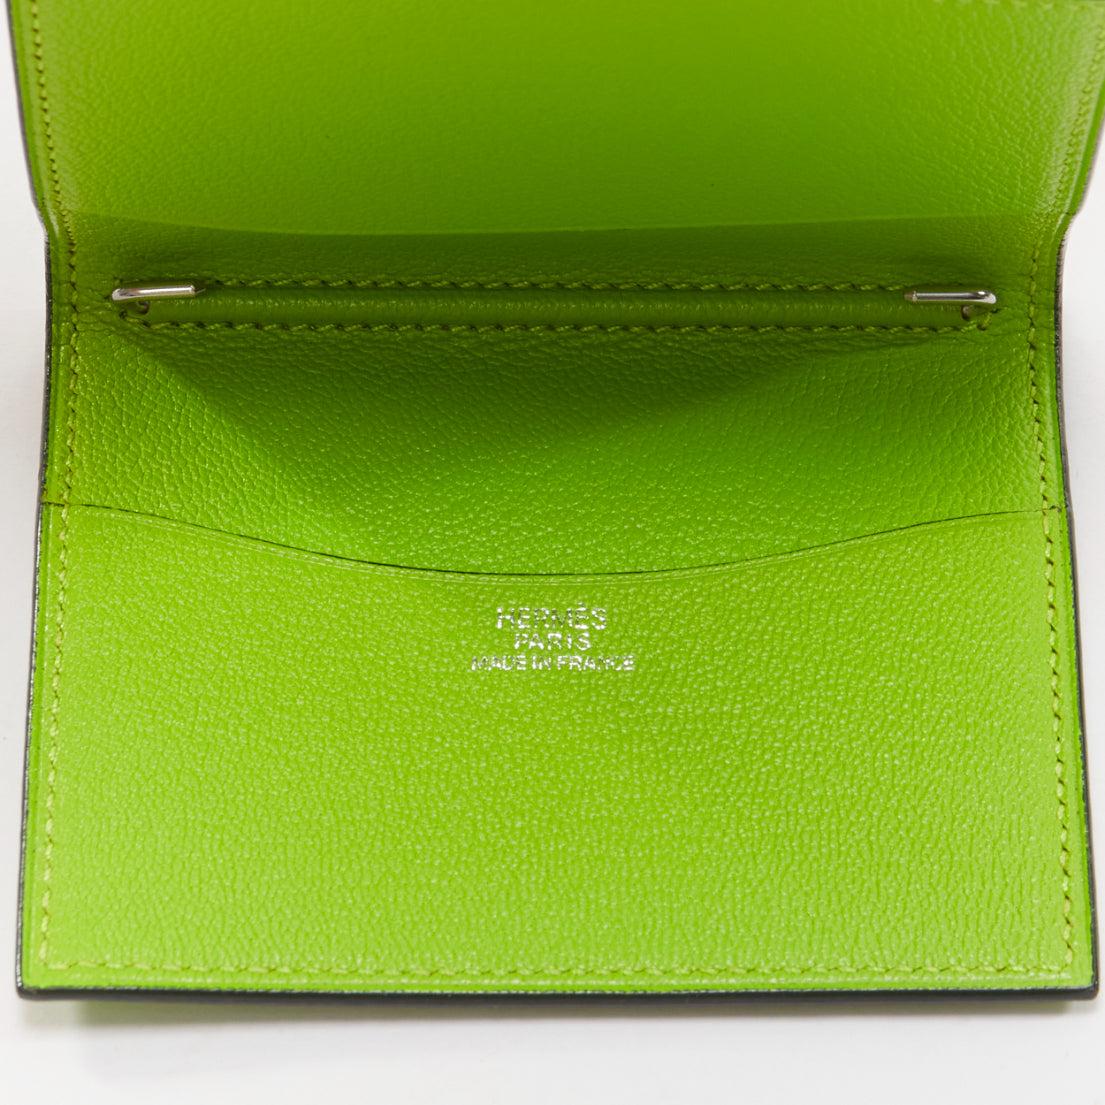 HERMES neon green smooth leather silver hardware bifold cardholder
Reference: AAWC/A00988
Brand: Hermes
Material: Leather
Color: Green
Pattern: Solid
Lining: Green Leather
Made in: France

CONDITION:
Condition: Excellent, this item was pre-owned and